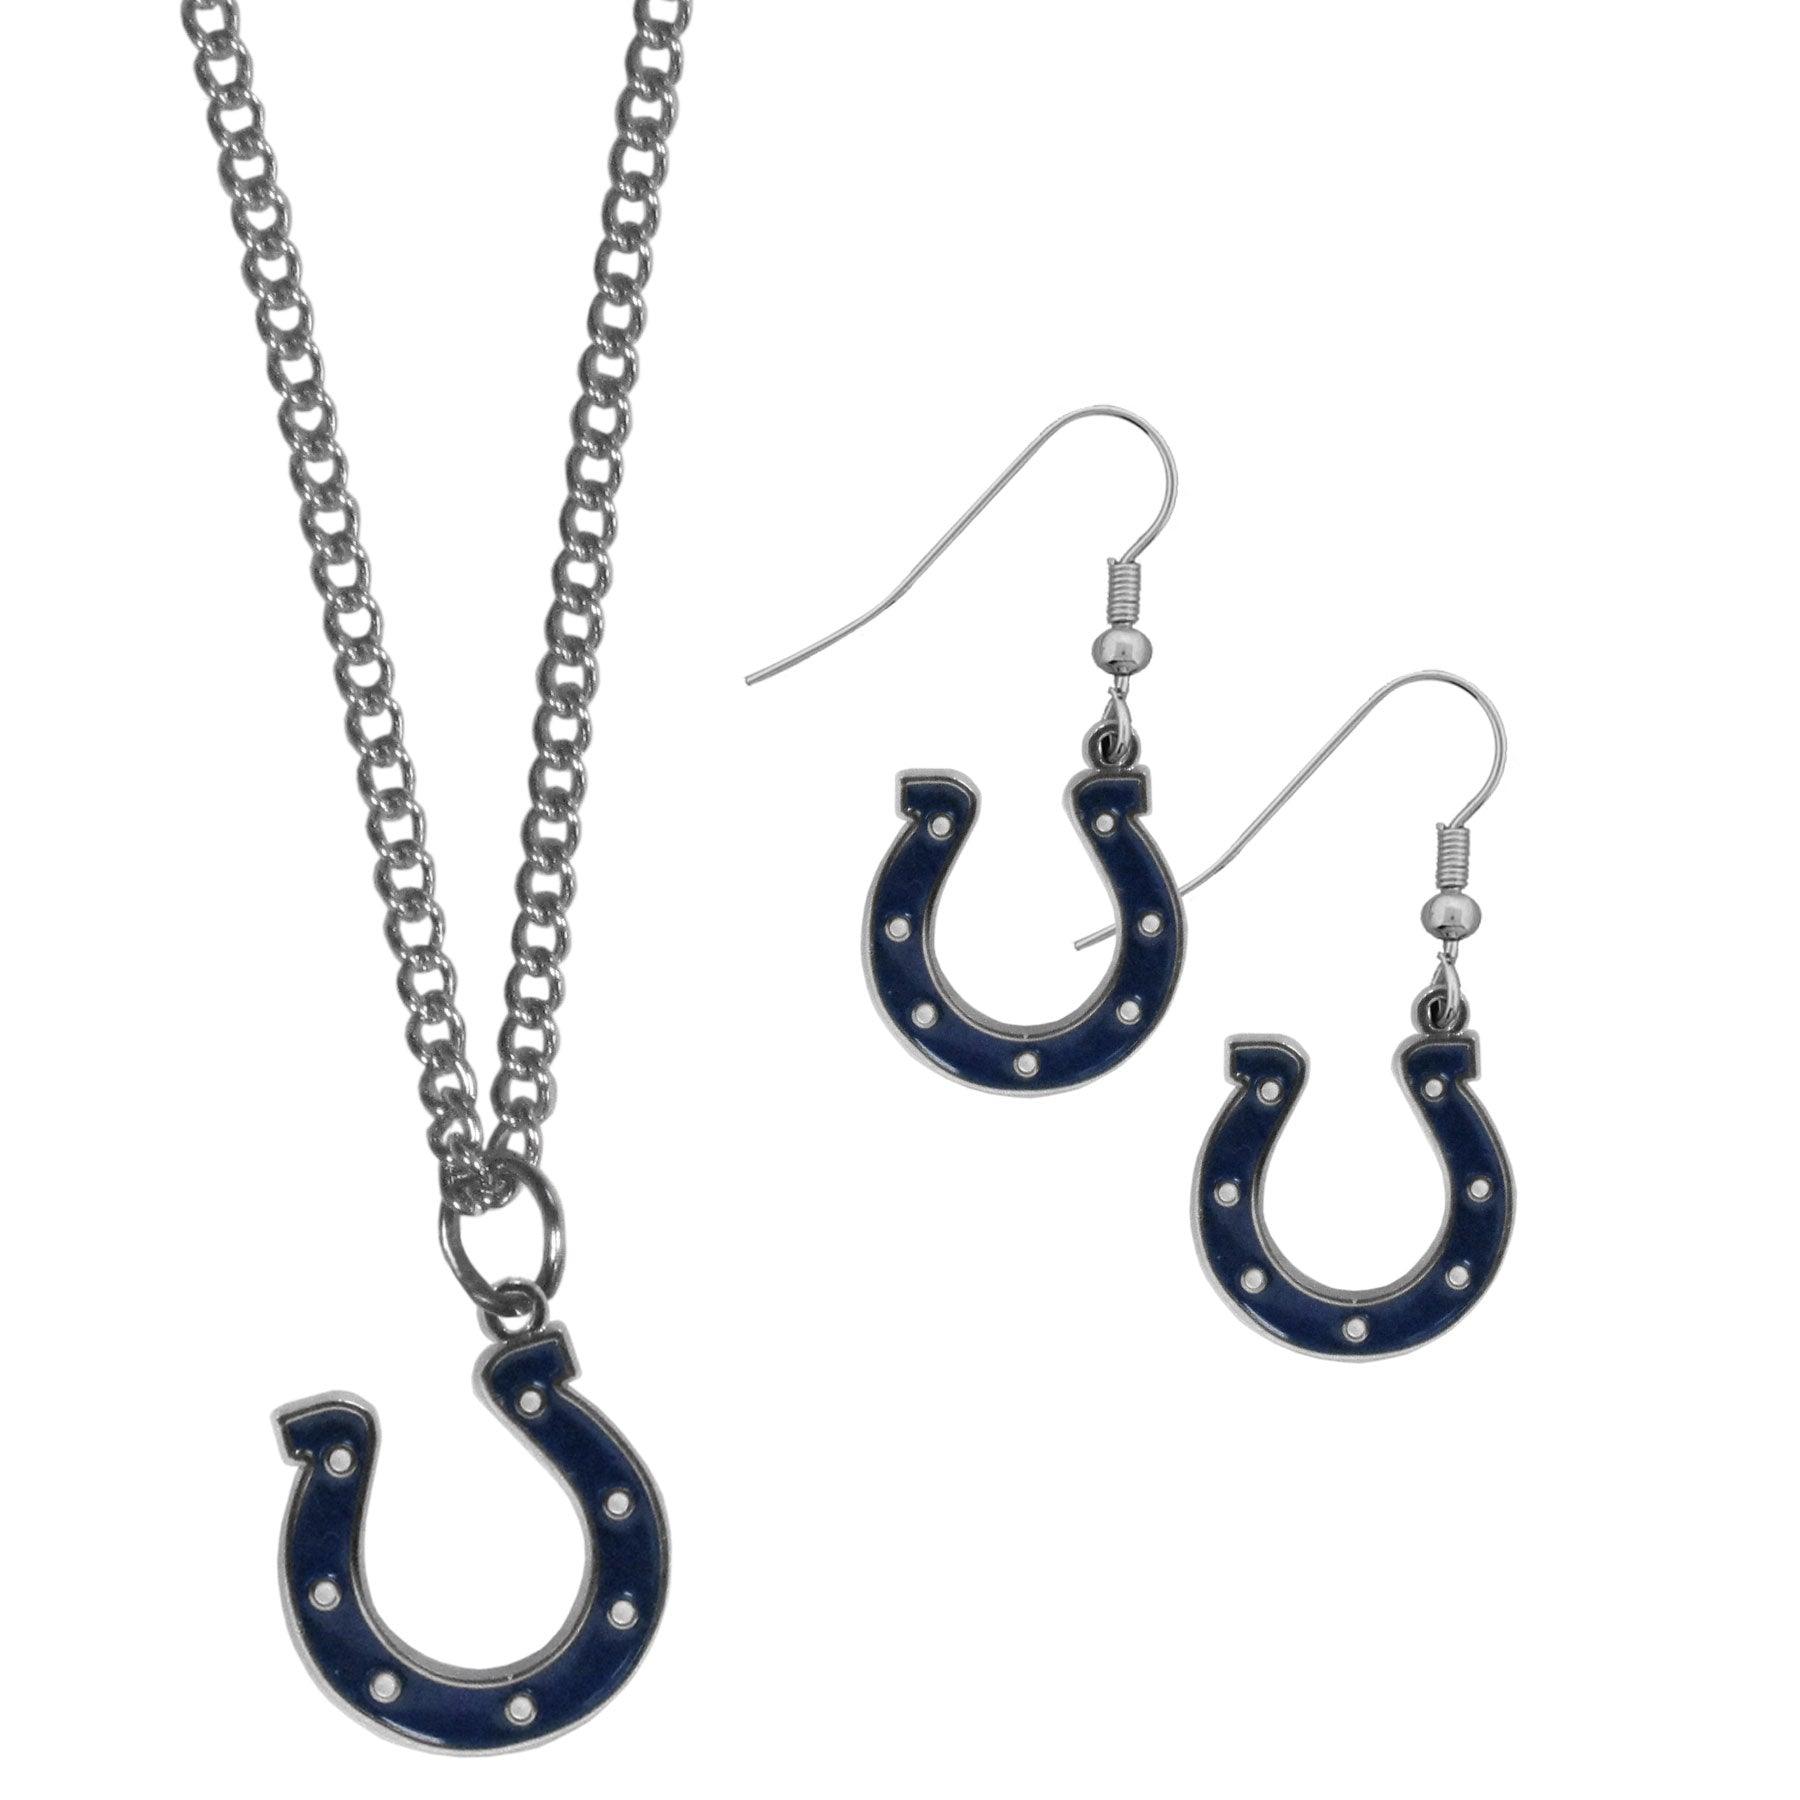 Indianapolis Colts Dangle Earrings and Chain Necklace Set - Flyclothing LLC